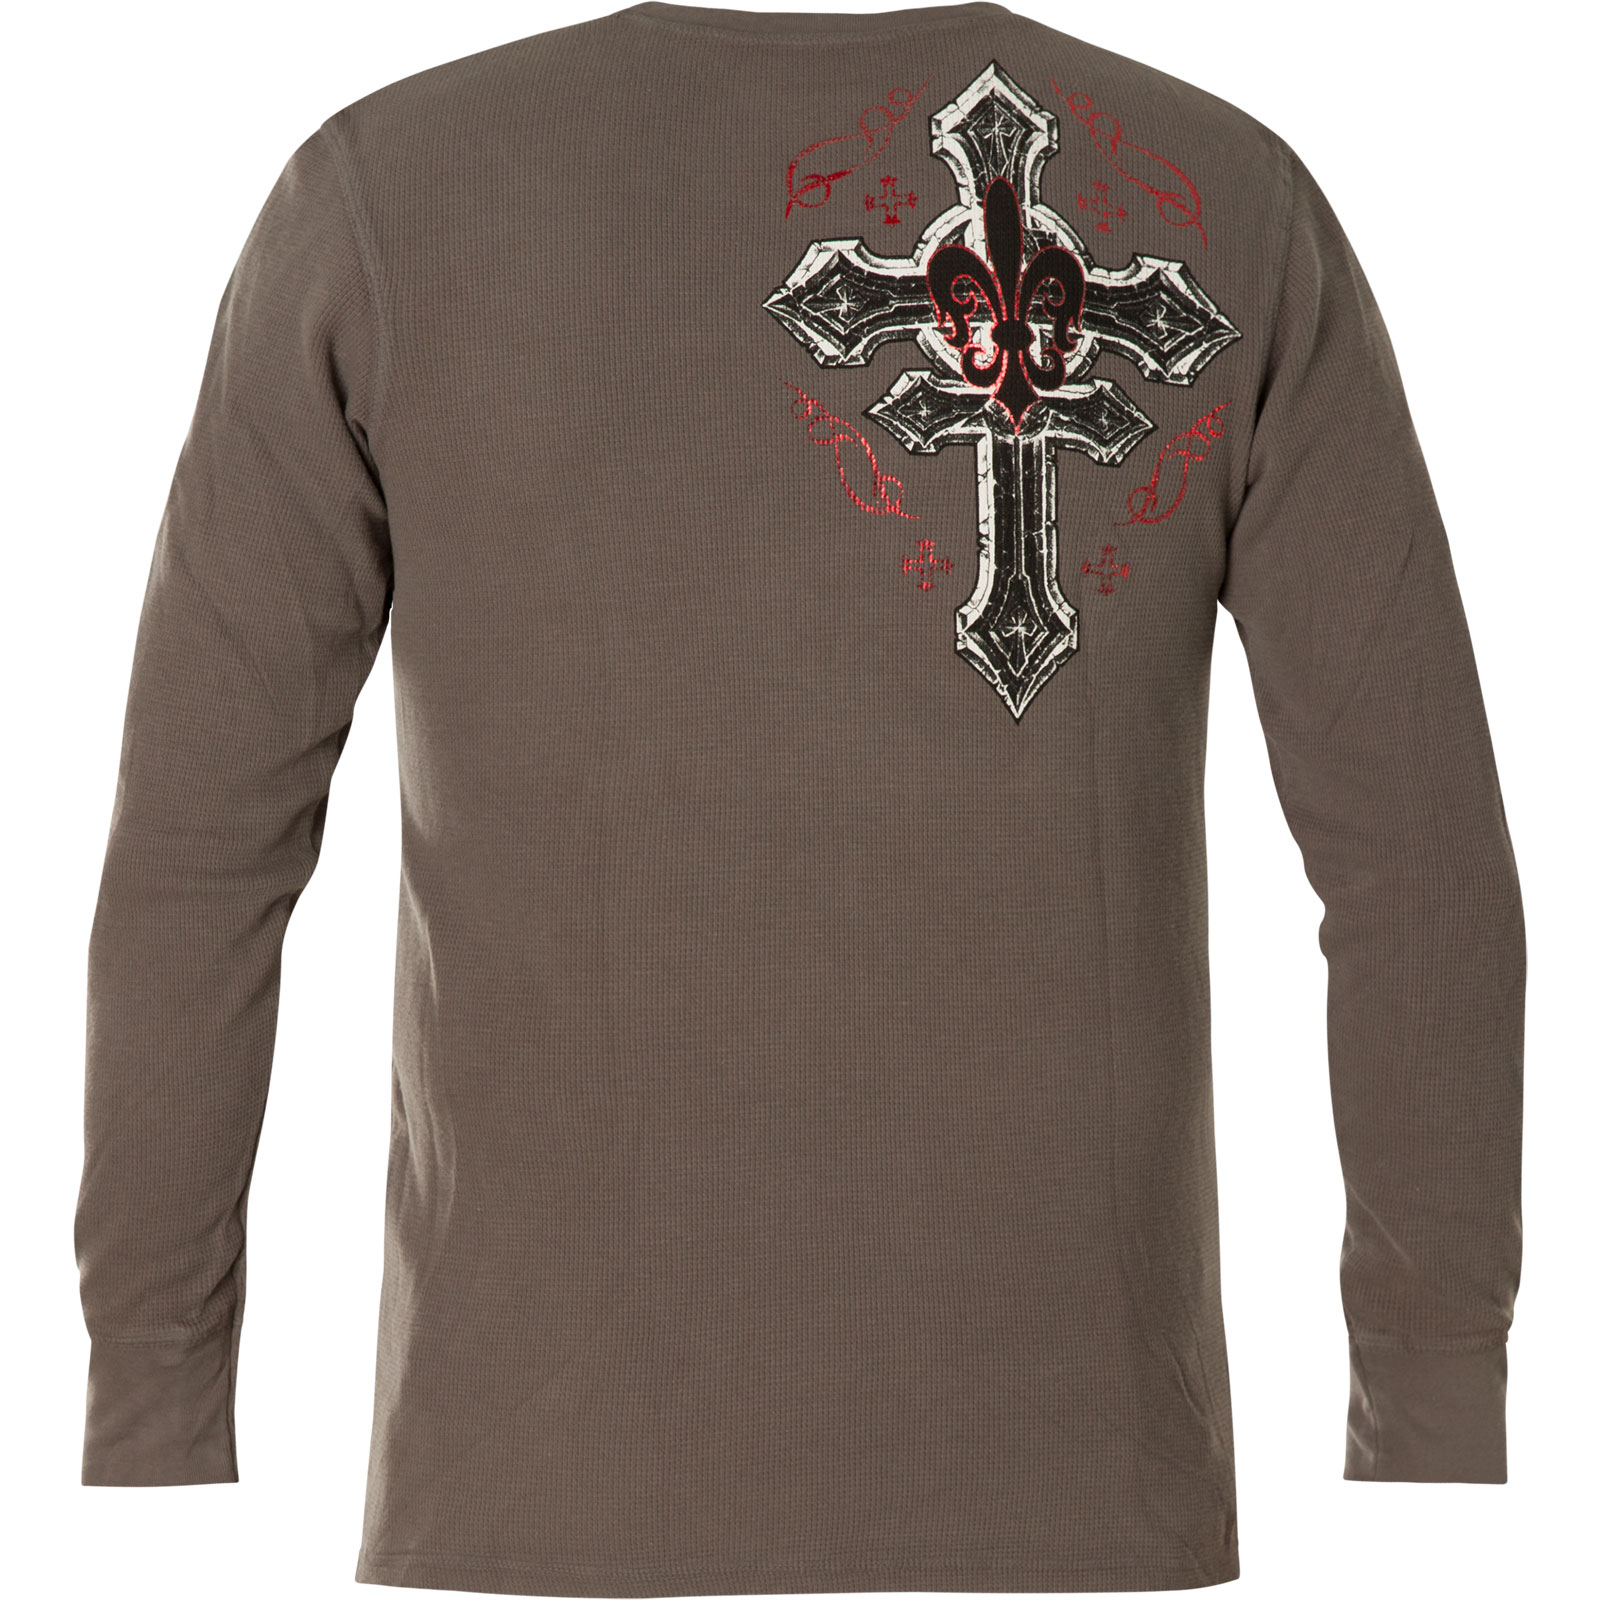 xtreme-couture-by-affliction-thermal-purely-devot-print-with-a-skull